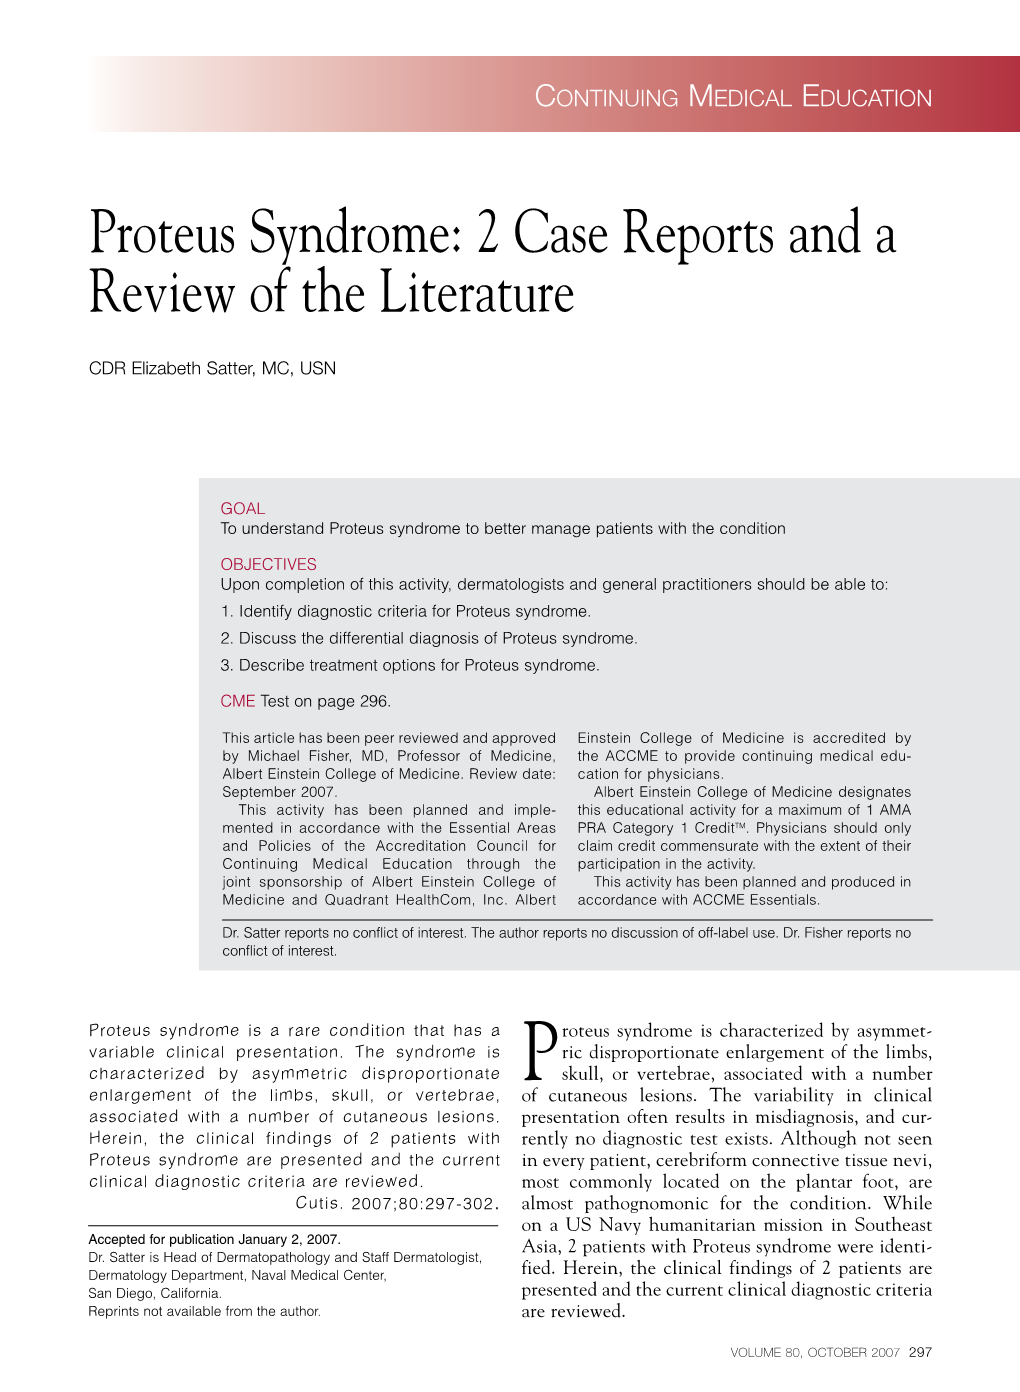 Proteus Syndrome: 2 Case Reports and a Review of the Literature